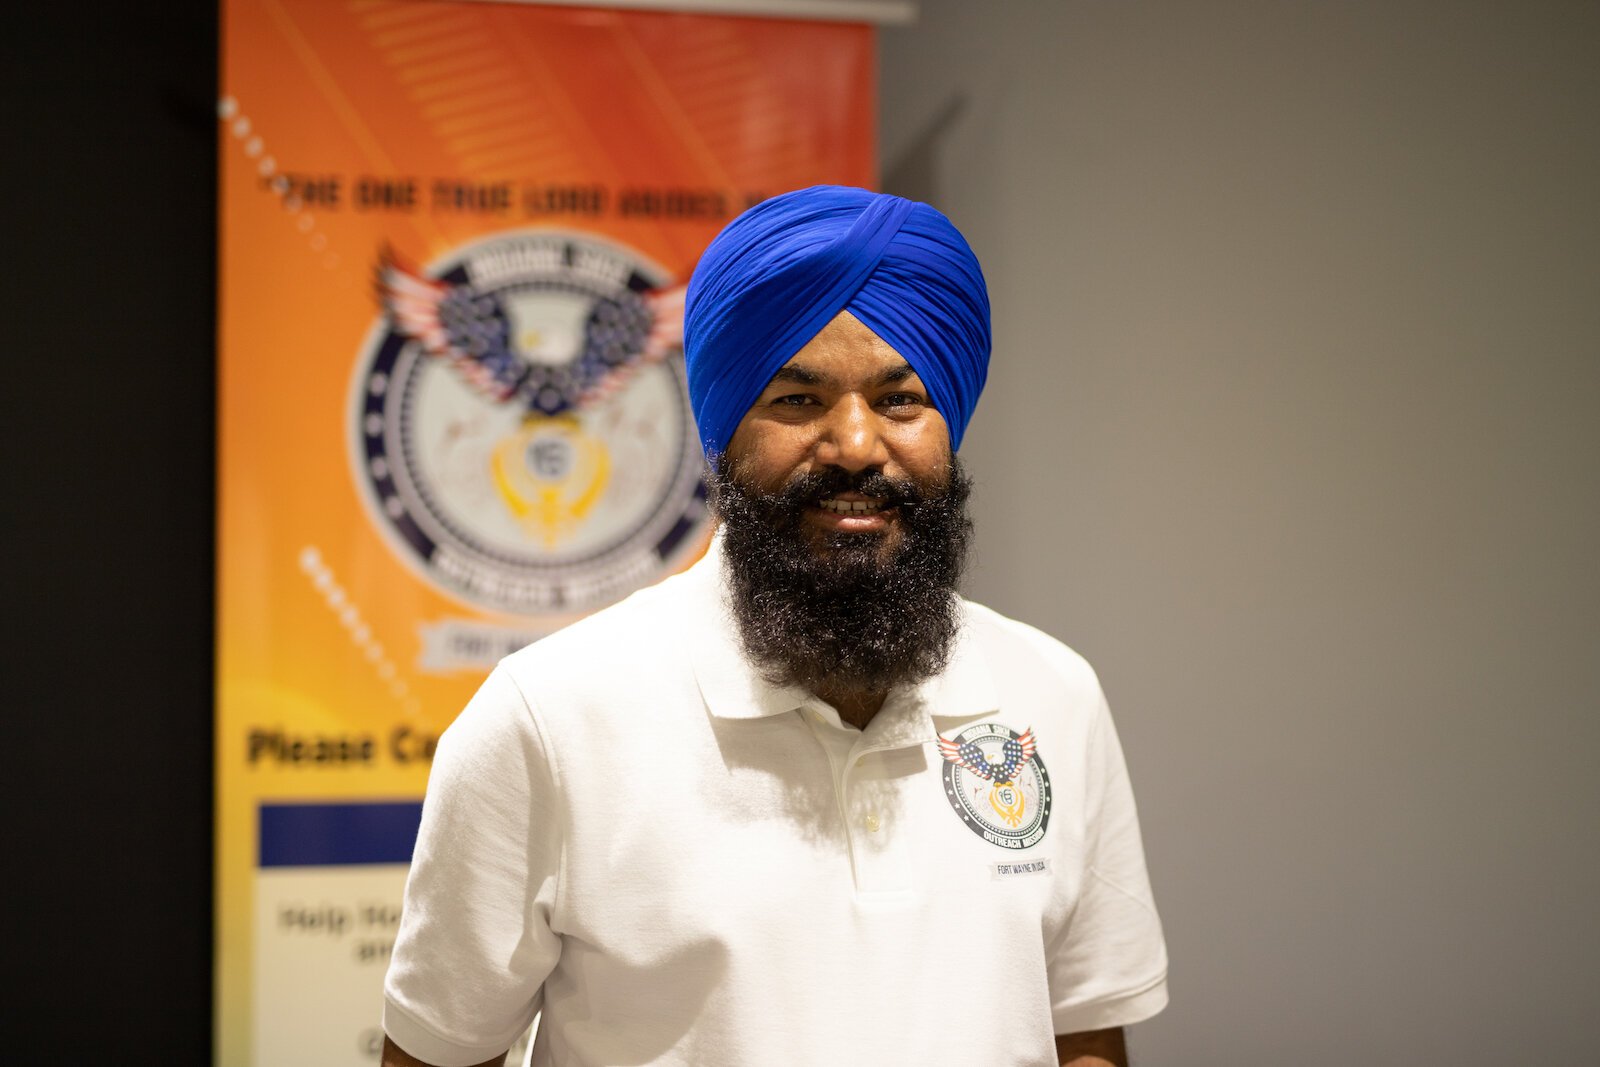 Jesse Singh is Founder of the Indiana Sikh Outreach Mission.